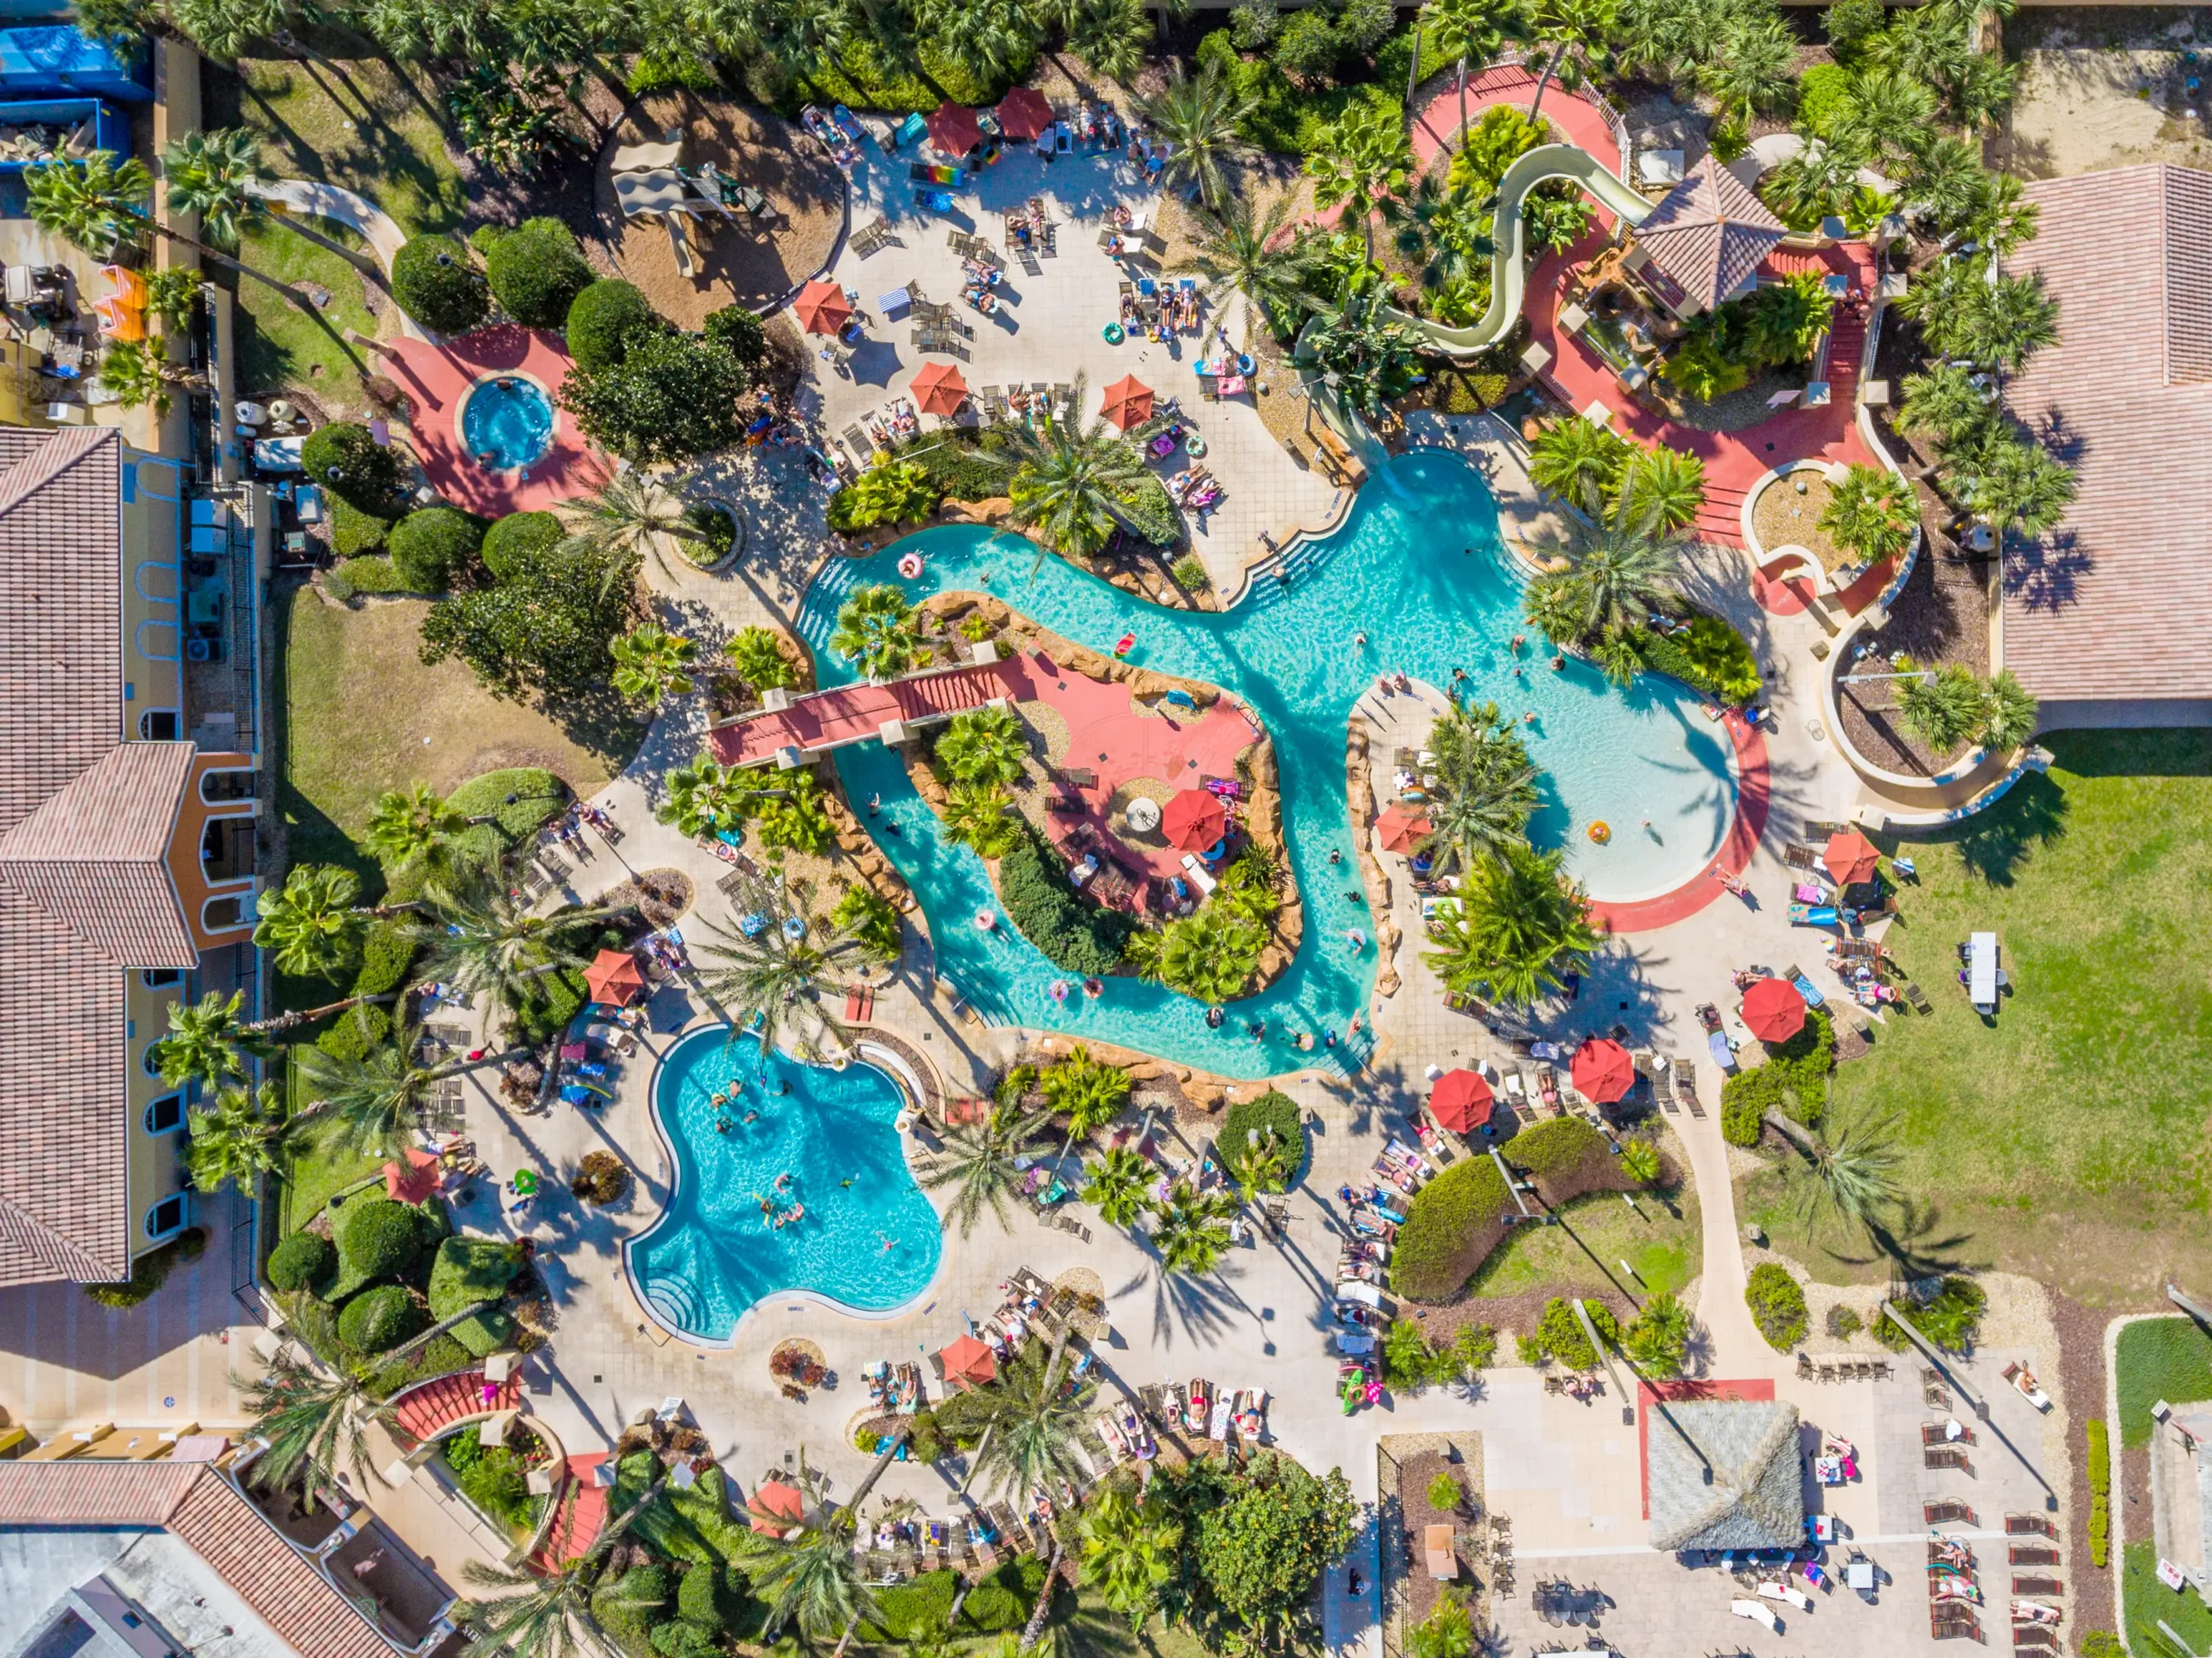 Regal Palms Resort pool from a drone above